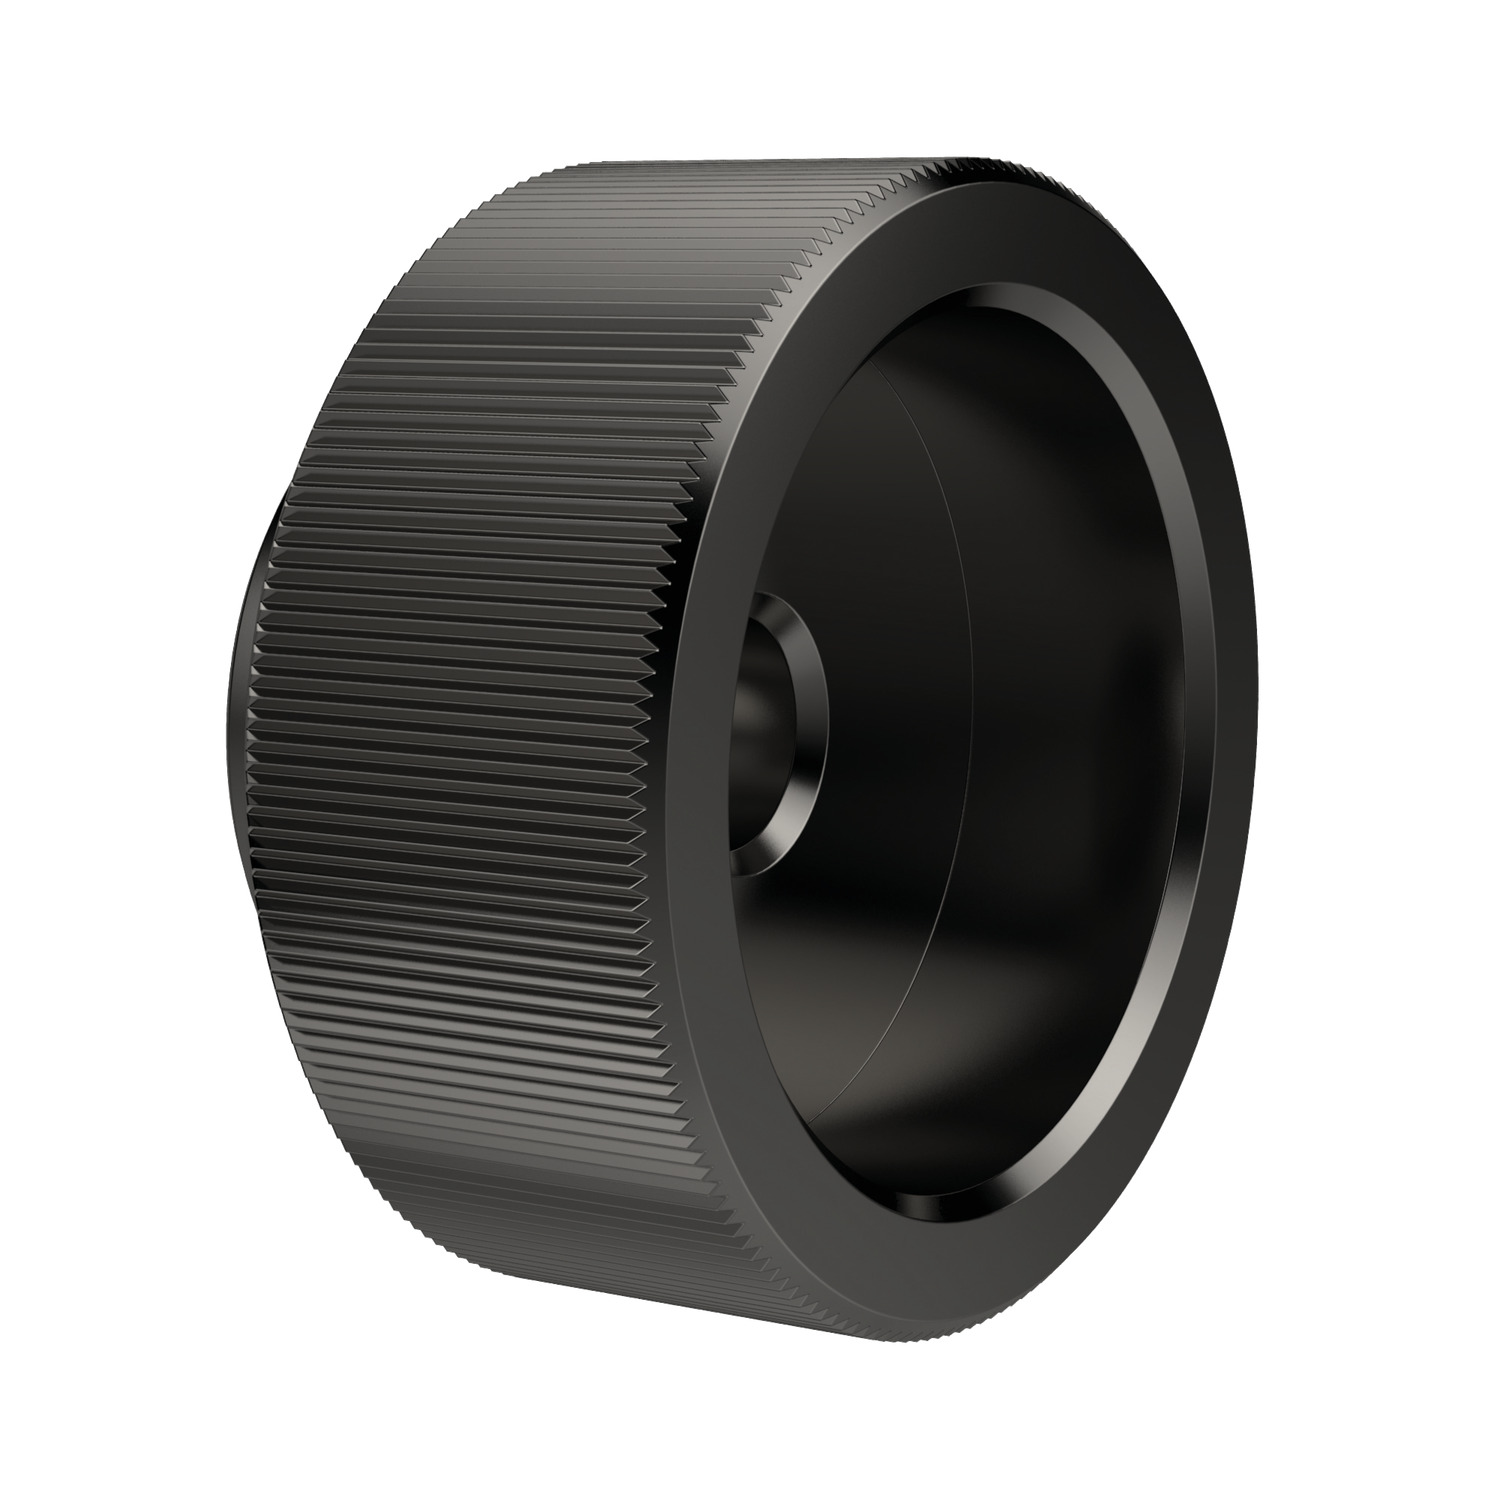 P0409.050-BL Knurled Nuts with Collar M5 blackened 